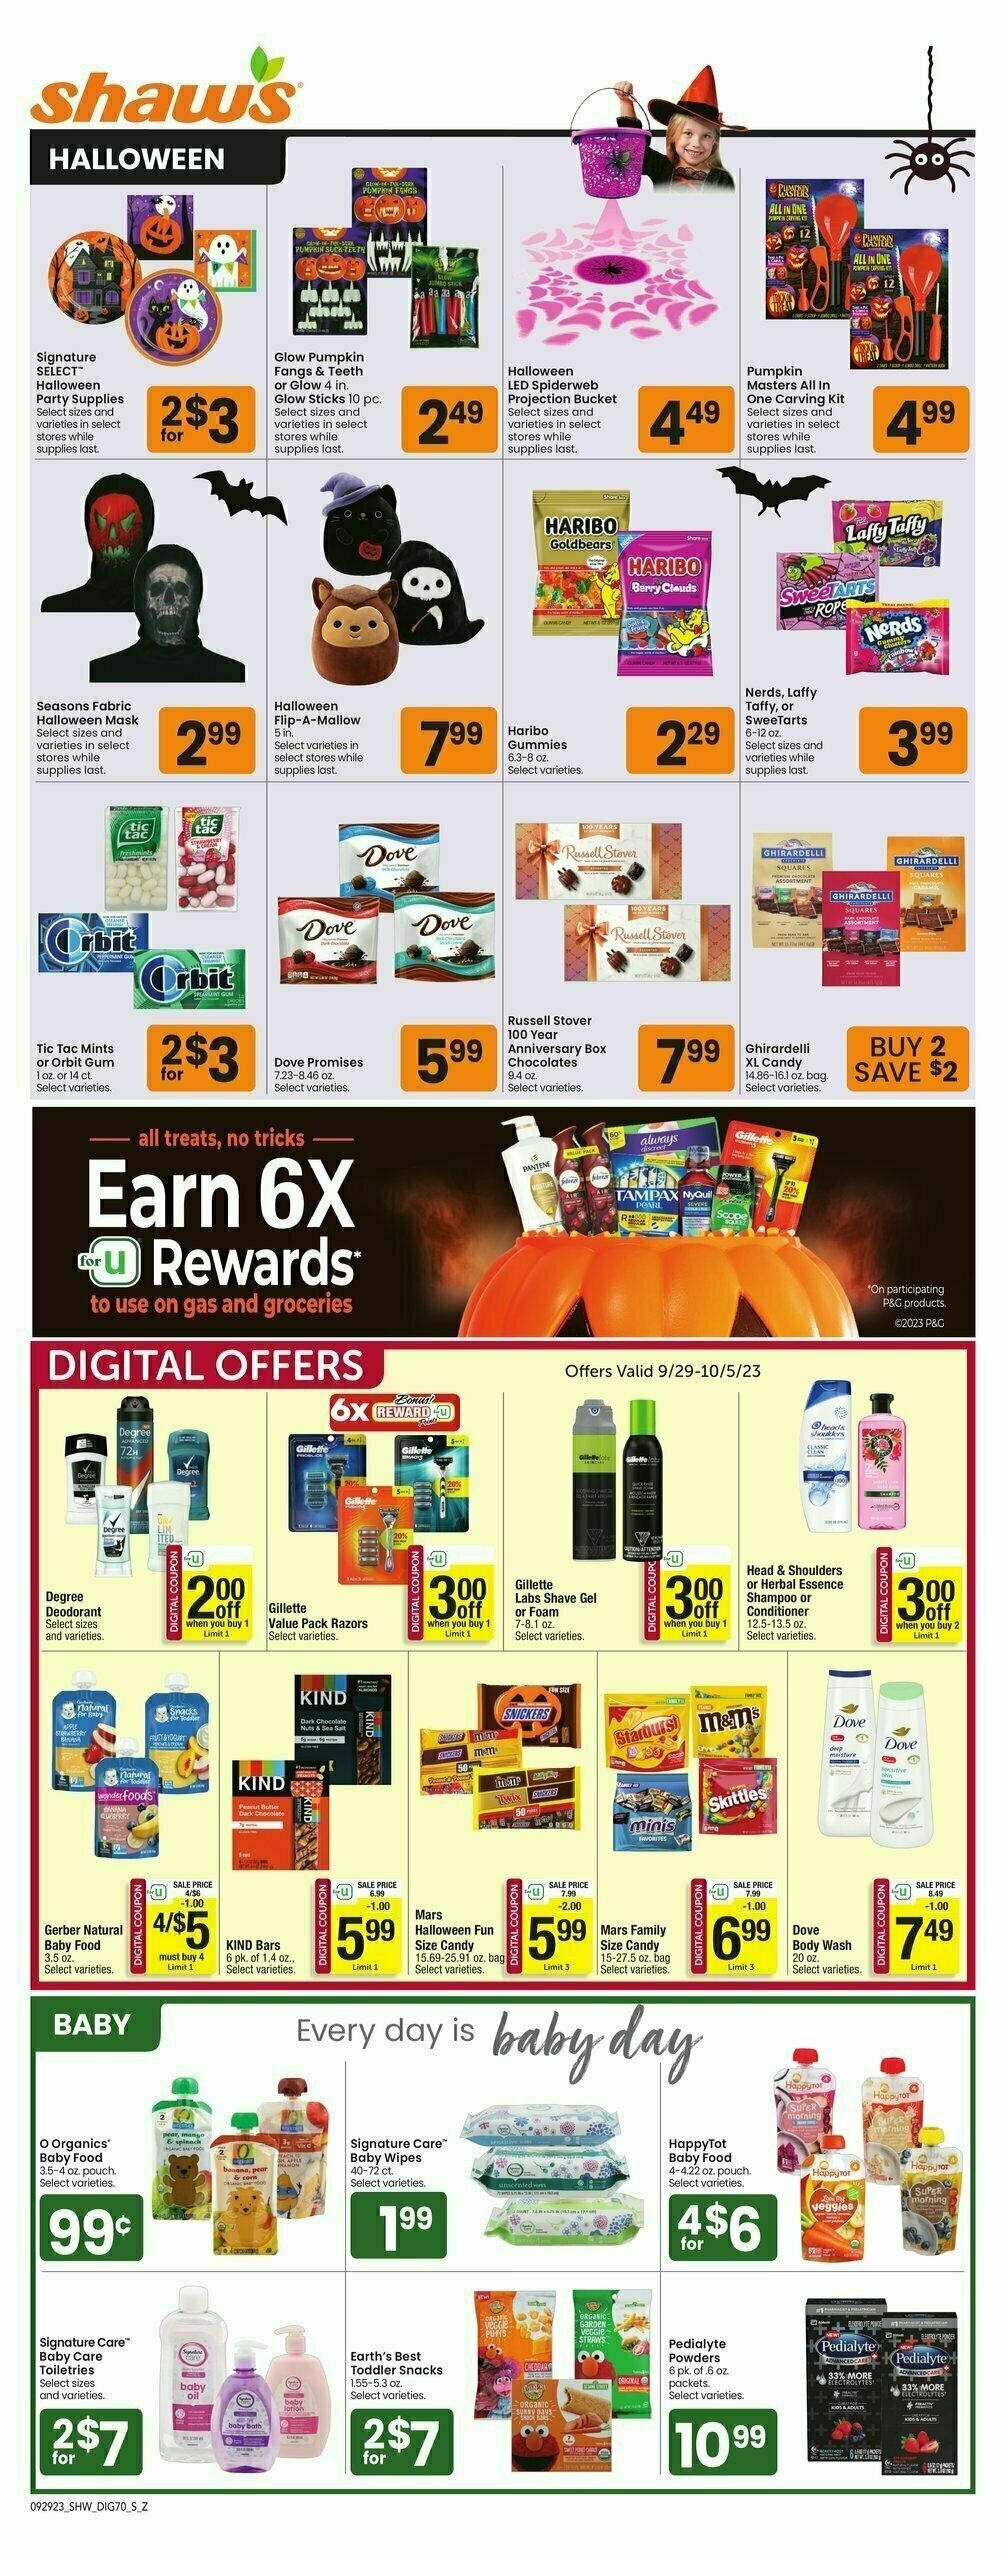 Shaw's Additional Savings Weekly Ad from September 29